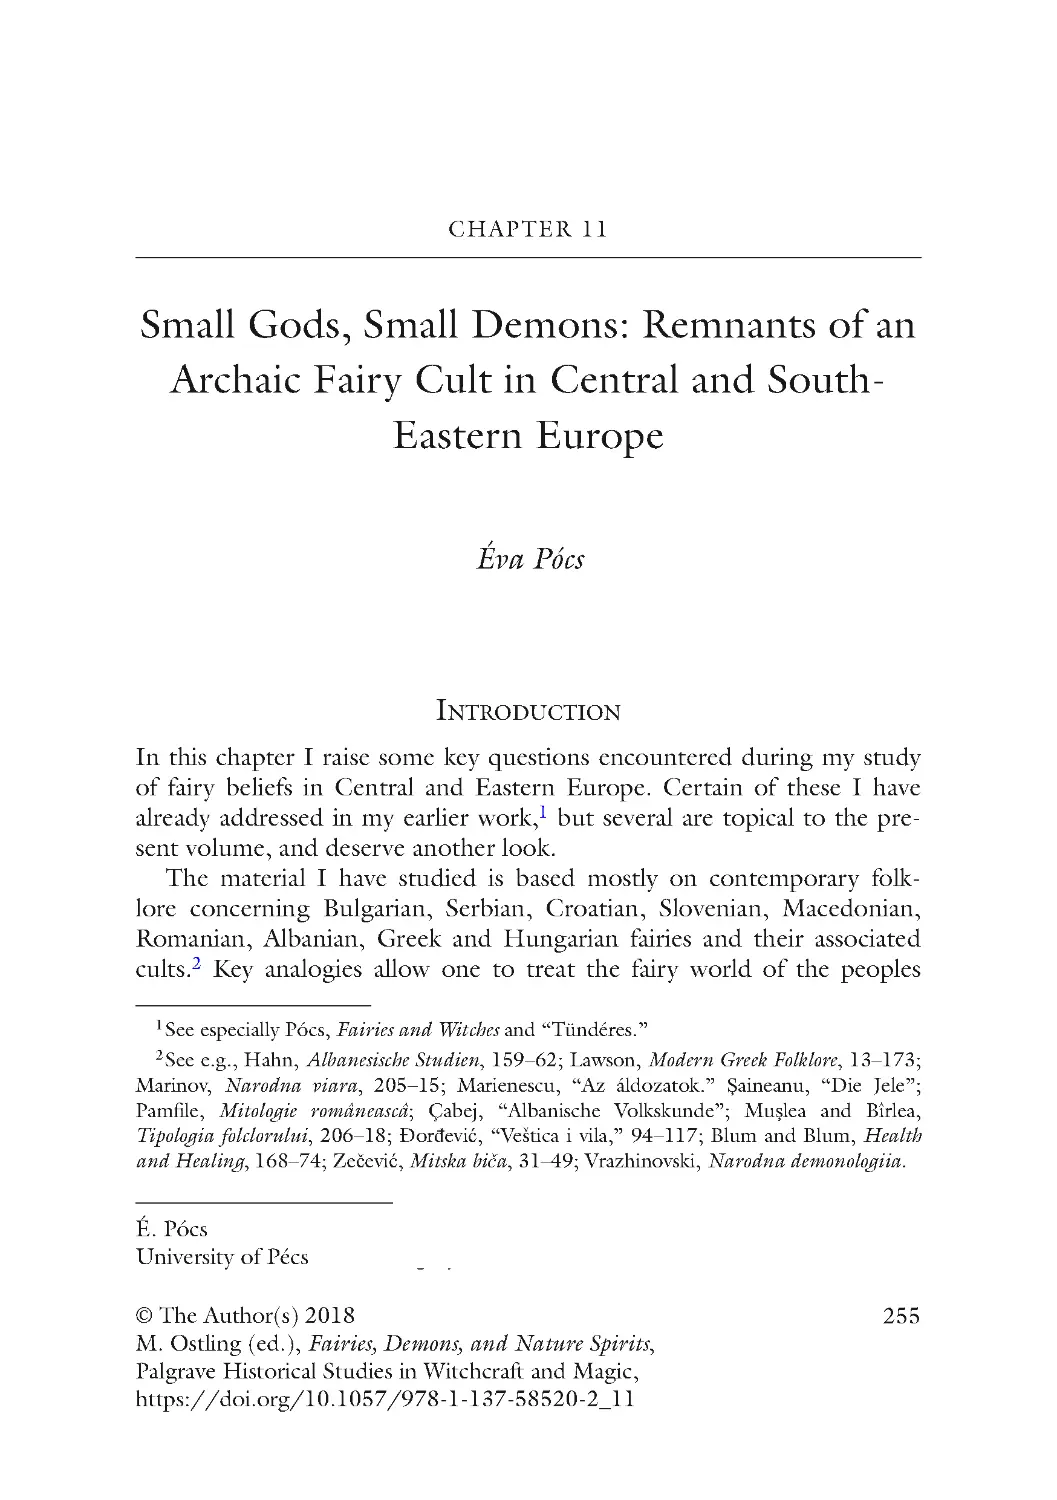 Chapter 11 Small Gods, Small Demons: Remnants of an Archaic Fairy Cult in Central and South-Eastern Europe